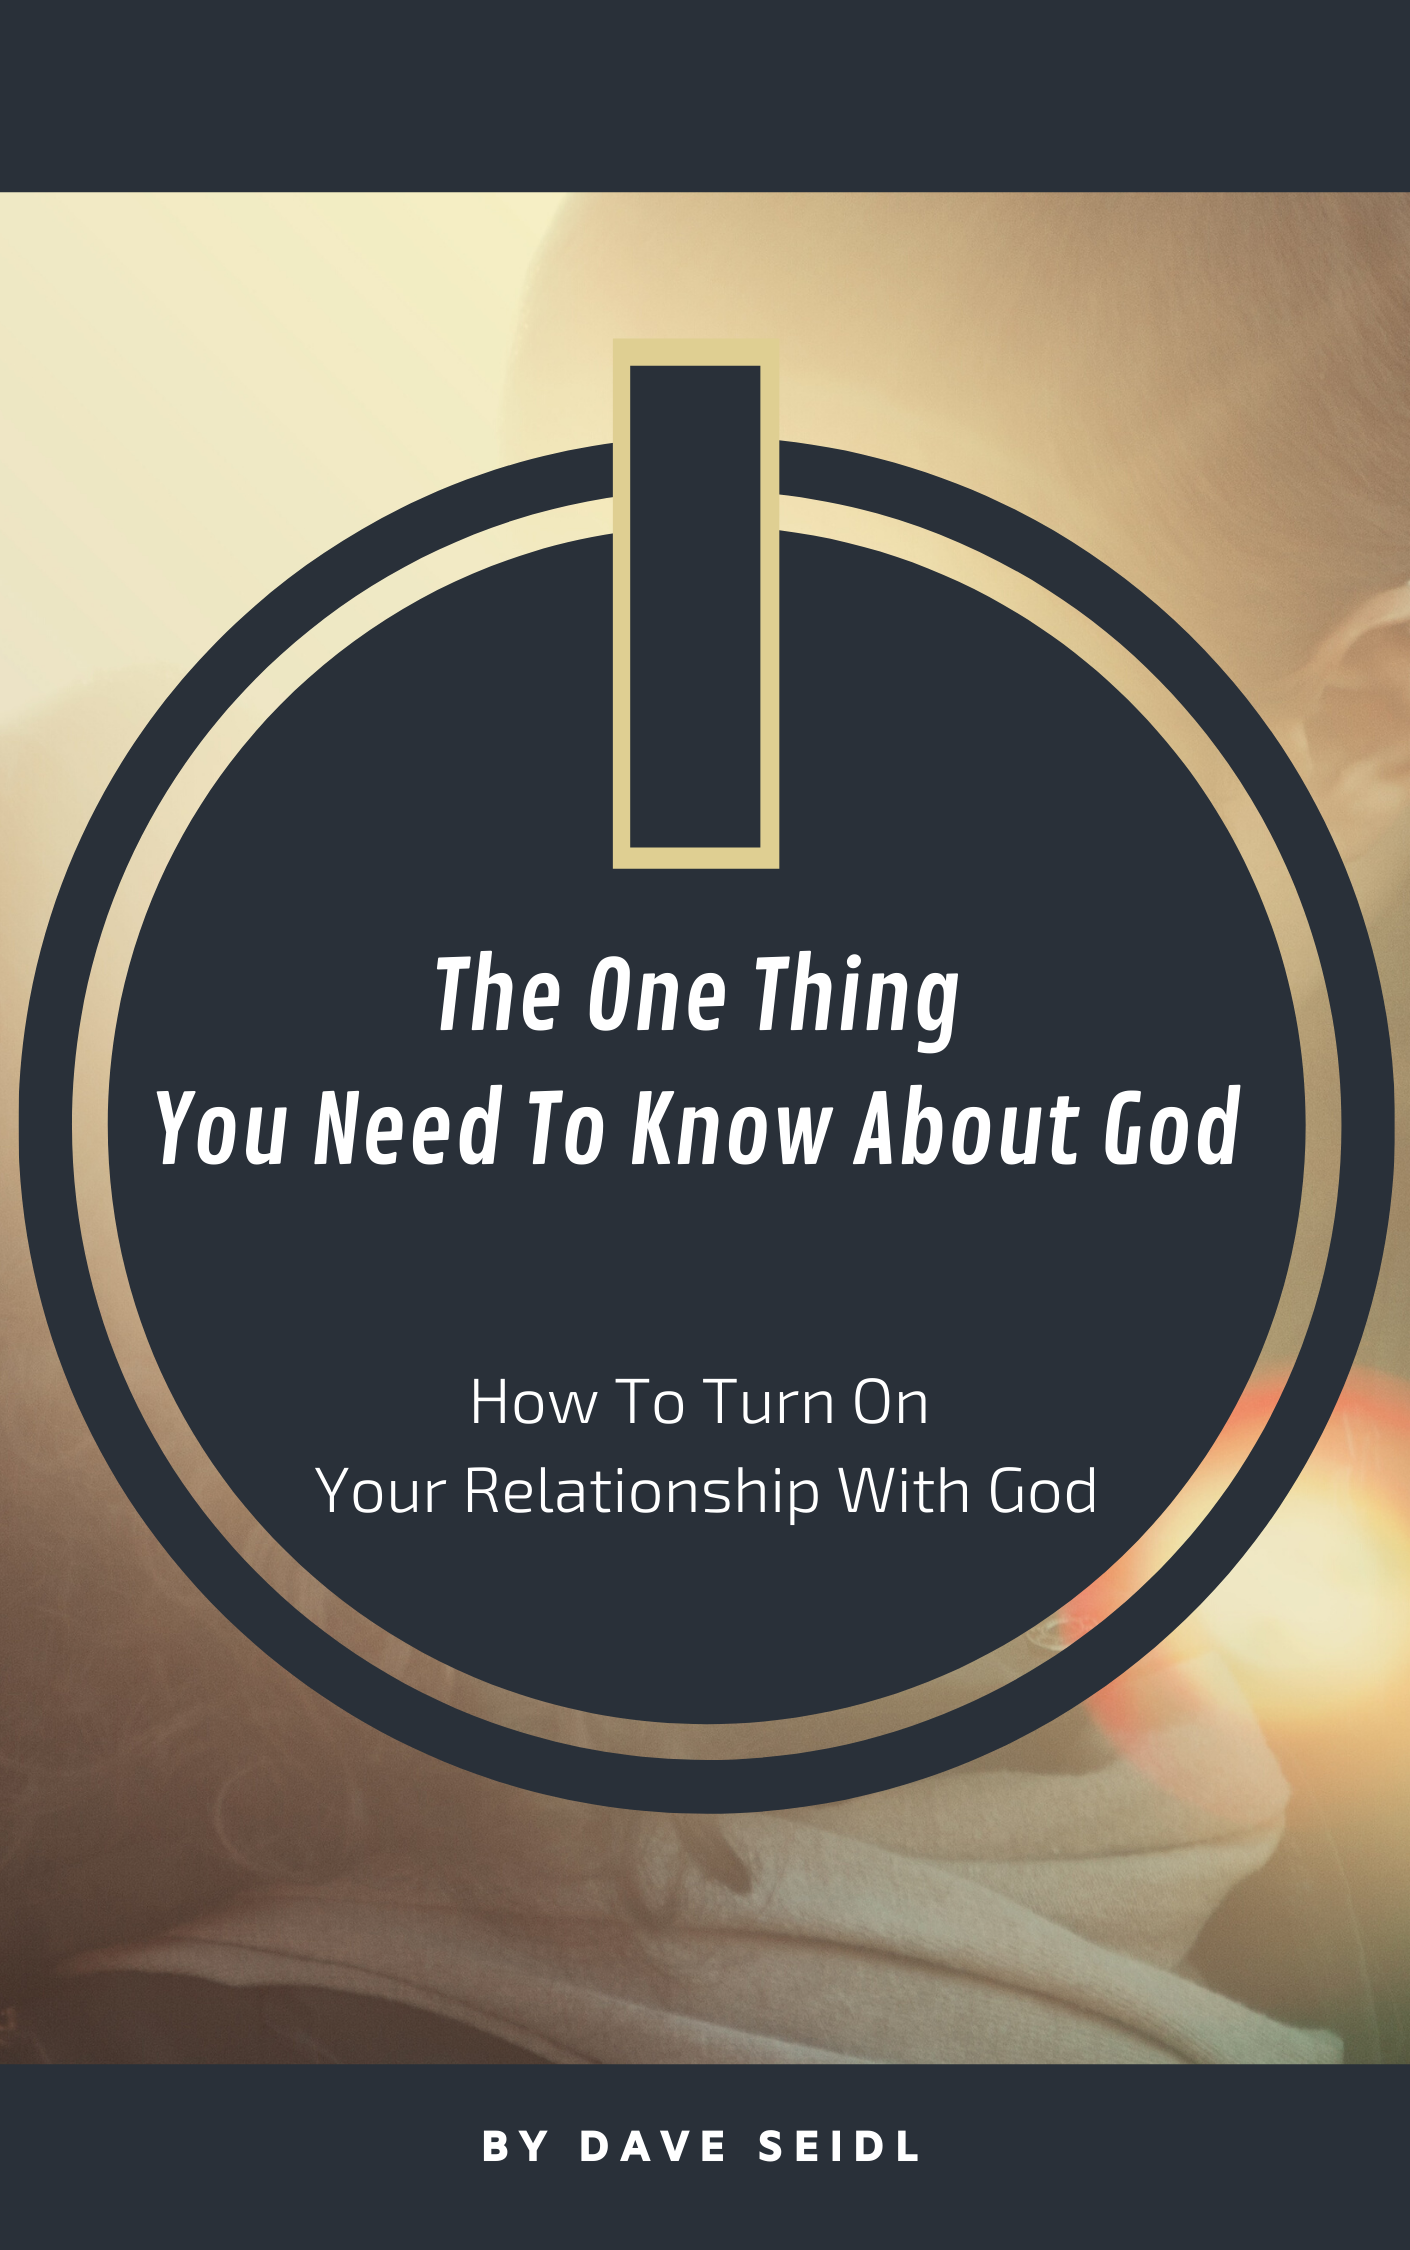 FREE: The One Thing You Need To Know About God by Dave Seidl